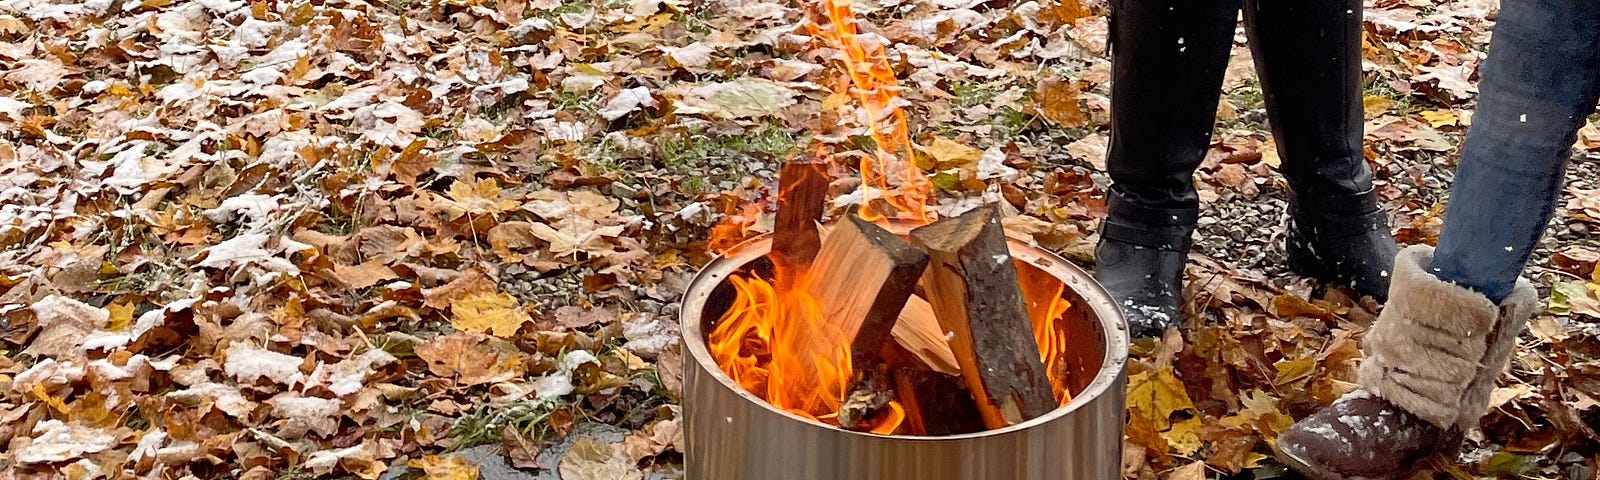 A portable bonfire unit surrounded by leaves and two people.